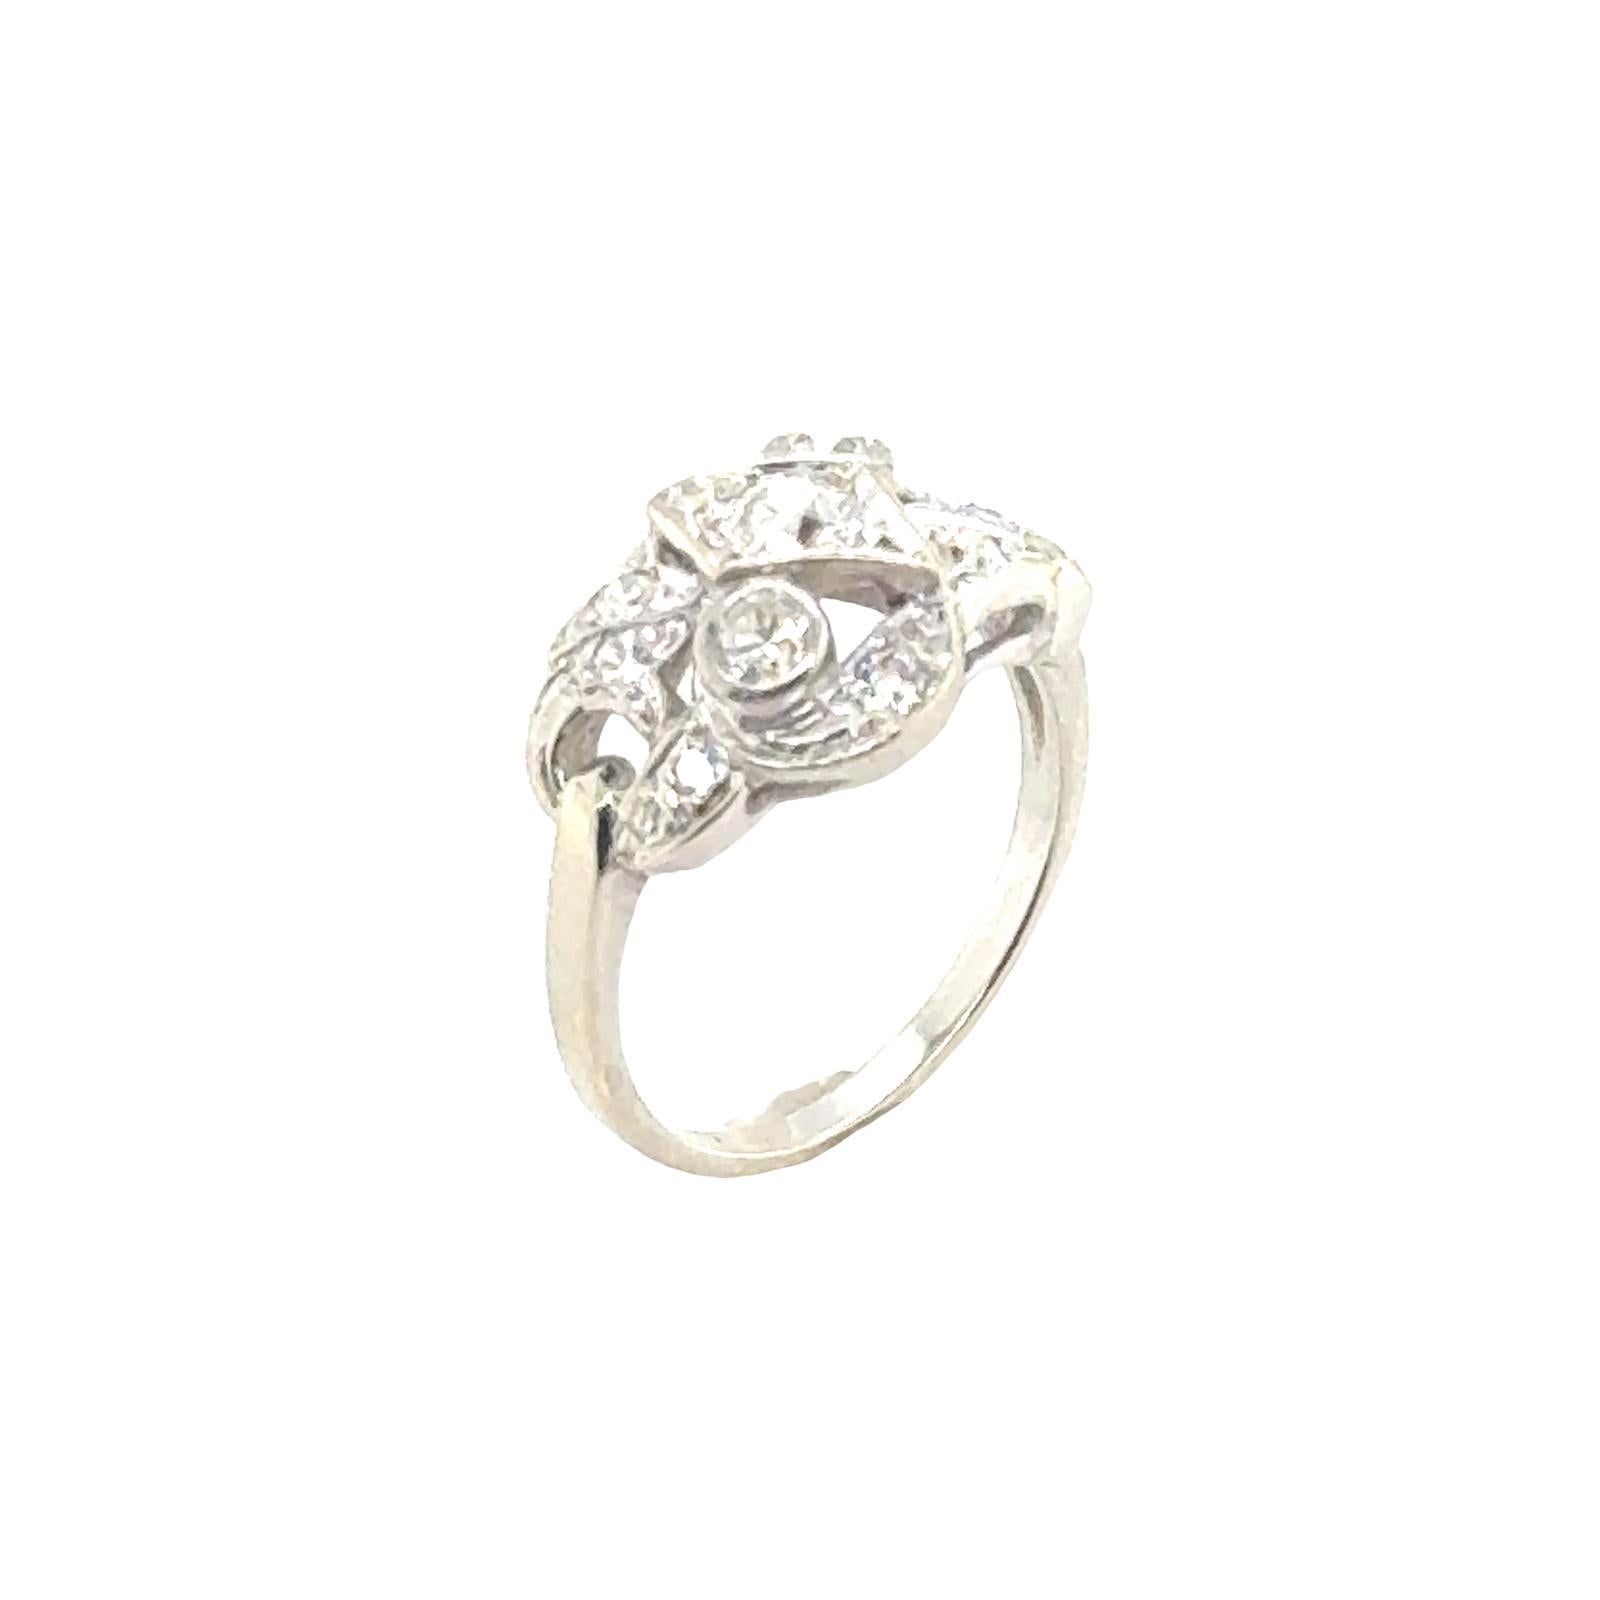 This 1940s vintage diamond cocktail ring is a captivating and elegant piece of jewelry that reflects the glamour and style of the era. The centerpiece of the ring are dazzling round brilliant diamonds, chosen for their brilliance and sparkle. The